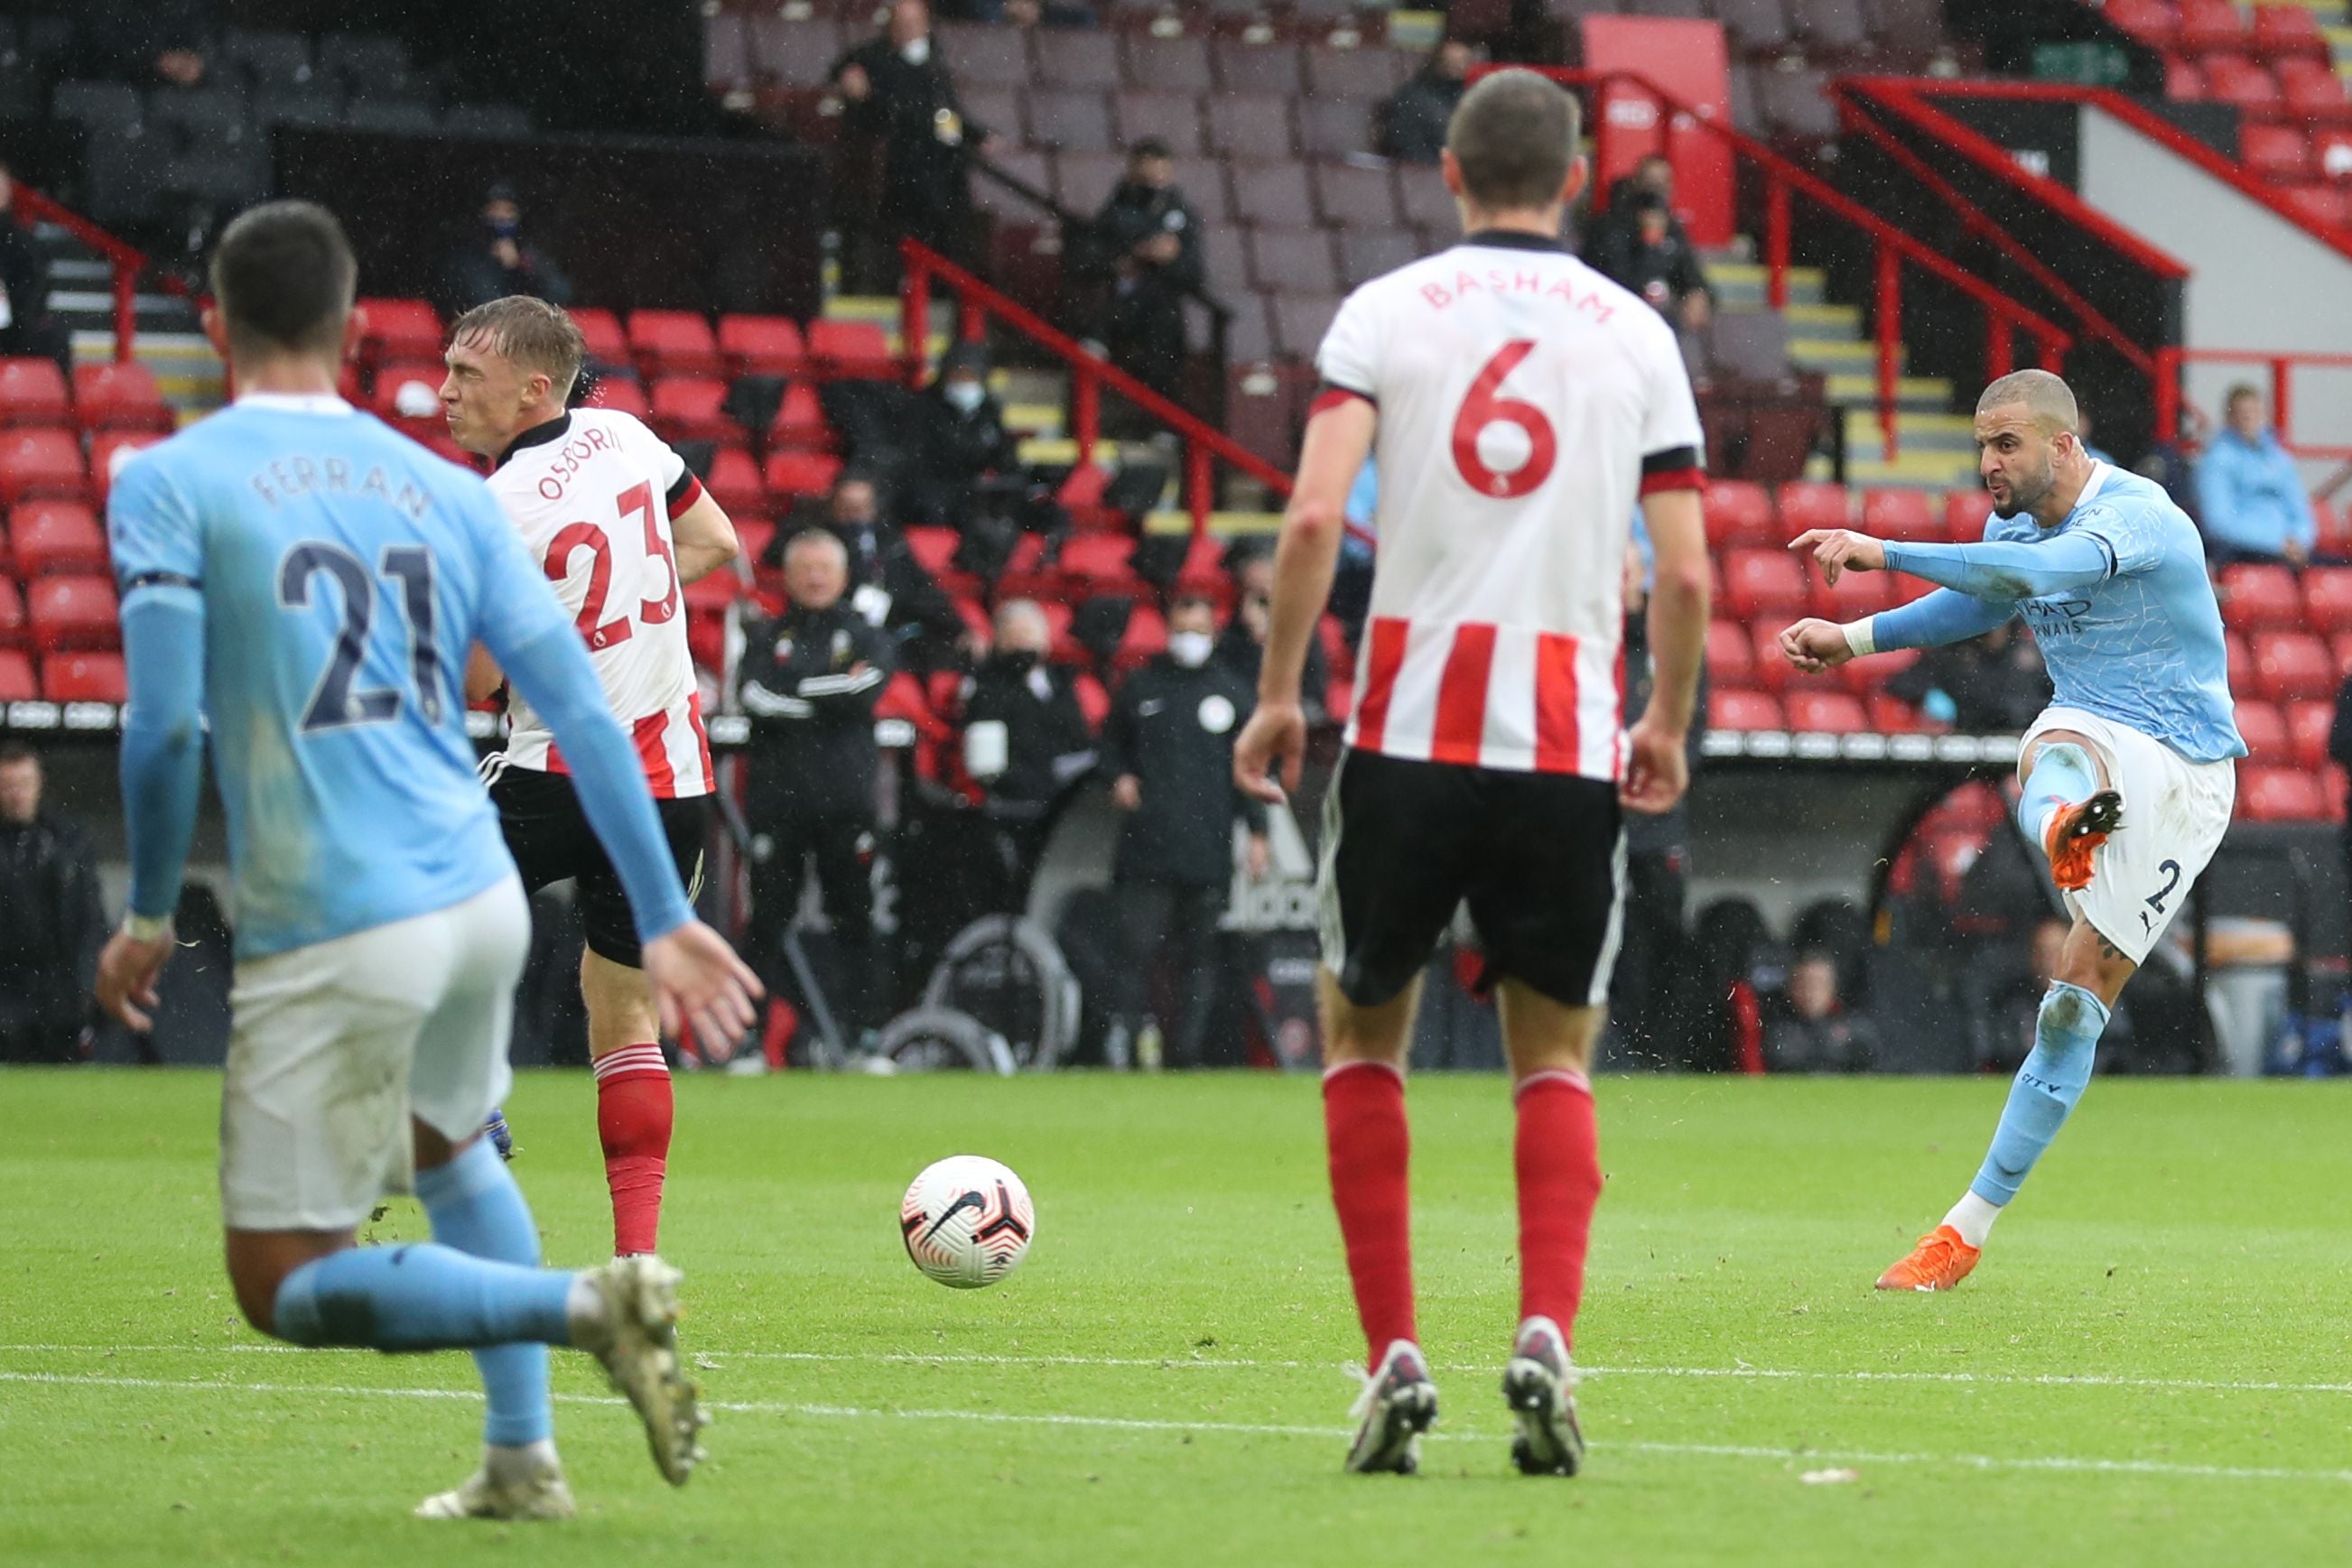 Kyle Walker fires City in front at Bramall Lane